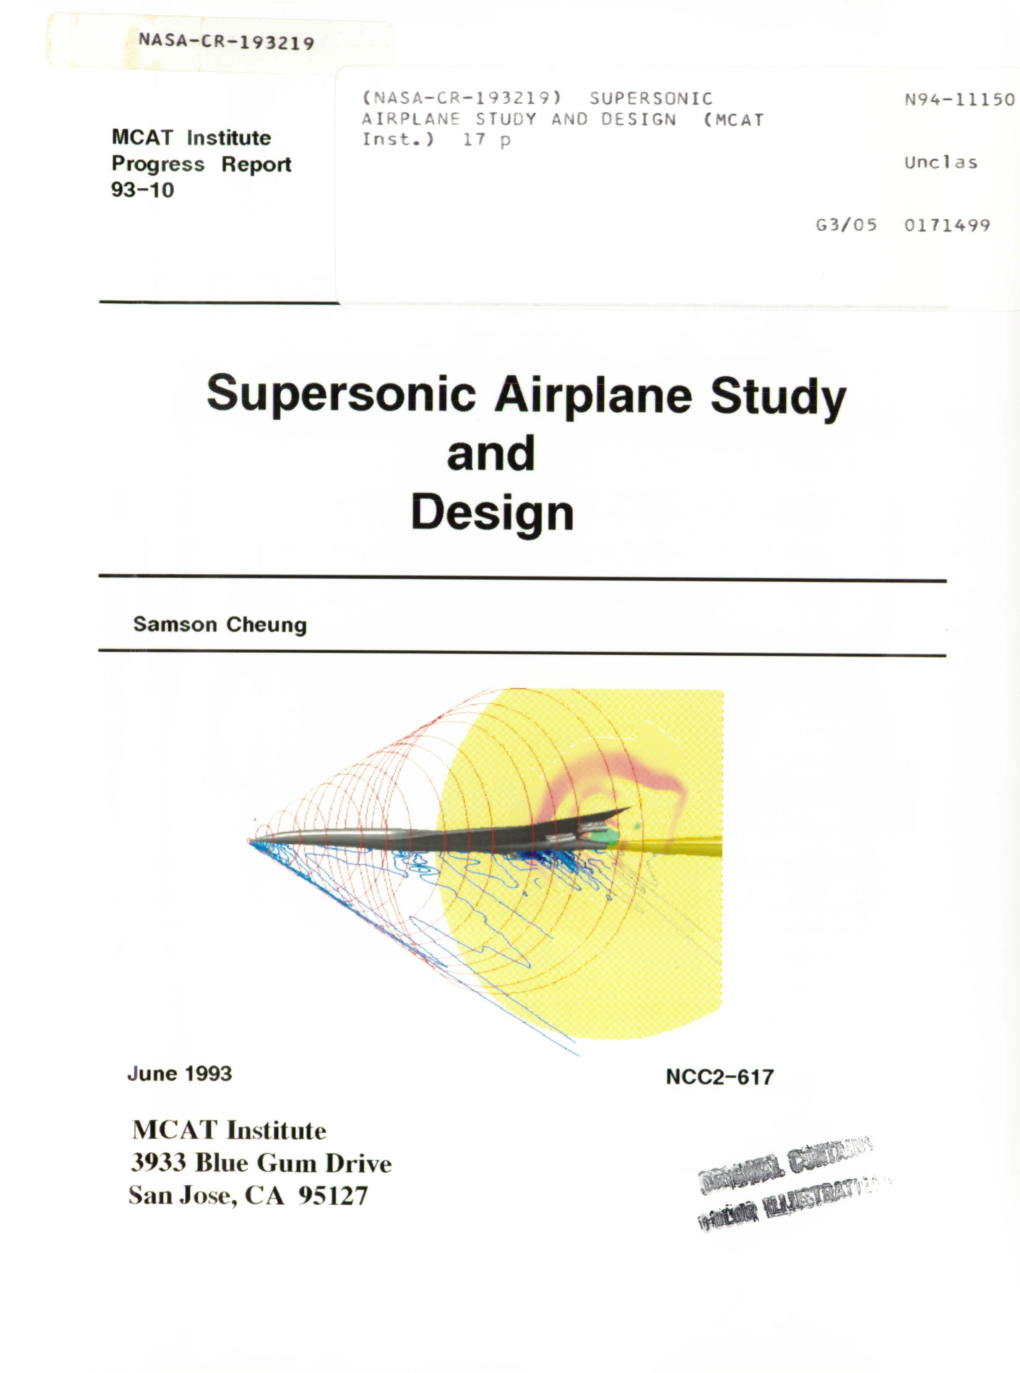 Supersonic Airplane Study and Design